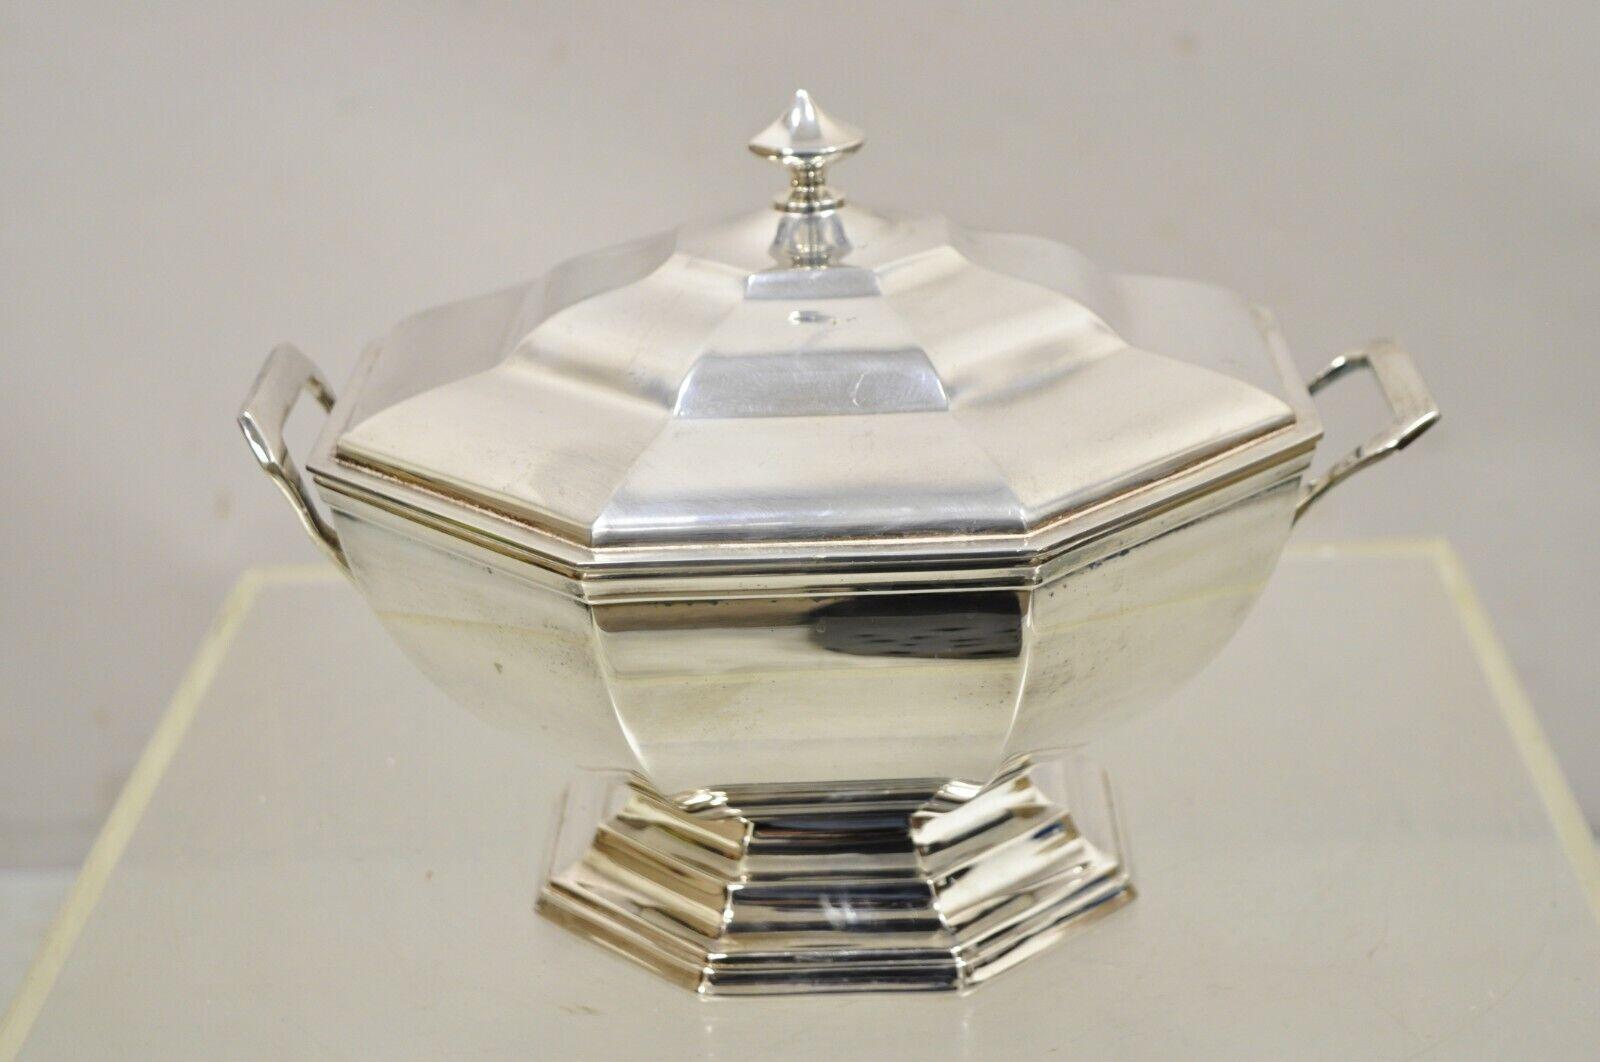 Soppil Wolff Silver Plate Covered Soup Tureen Casserole Lidded Dish Serving Dish. circa early to Mid-20th Century. Measurements: 8